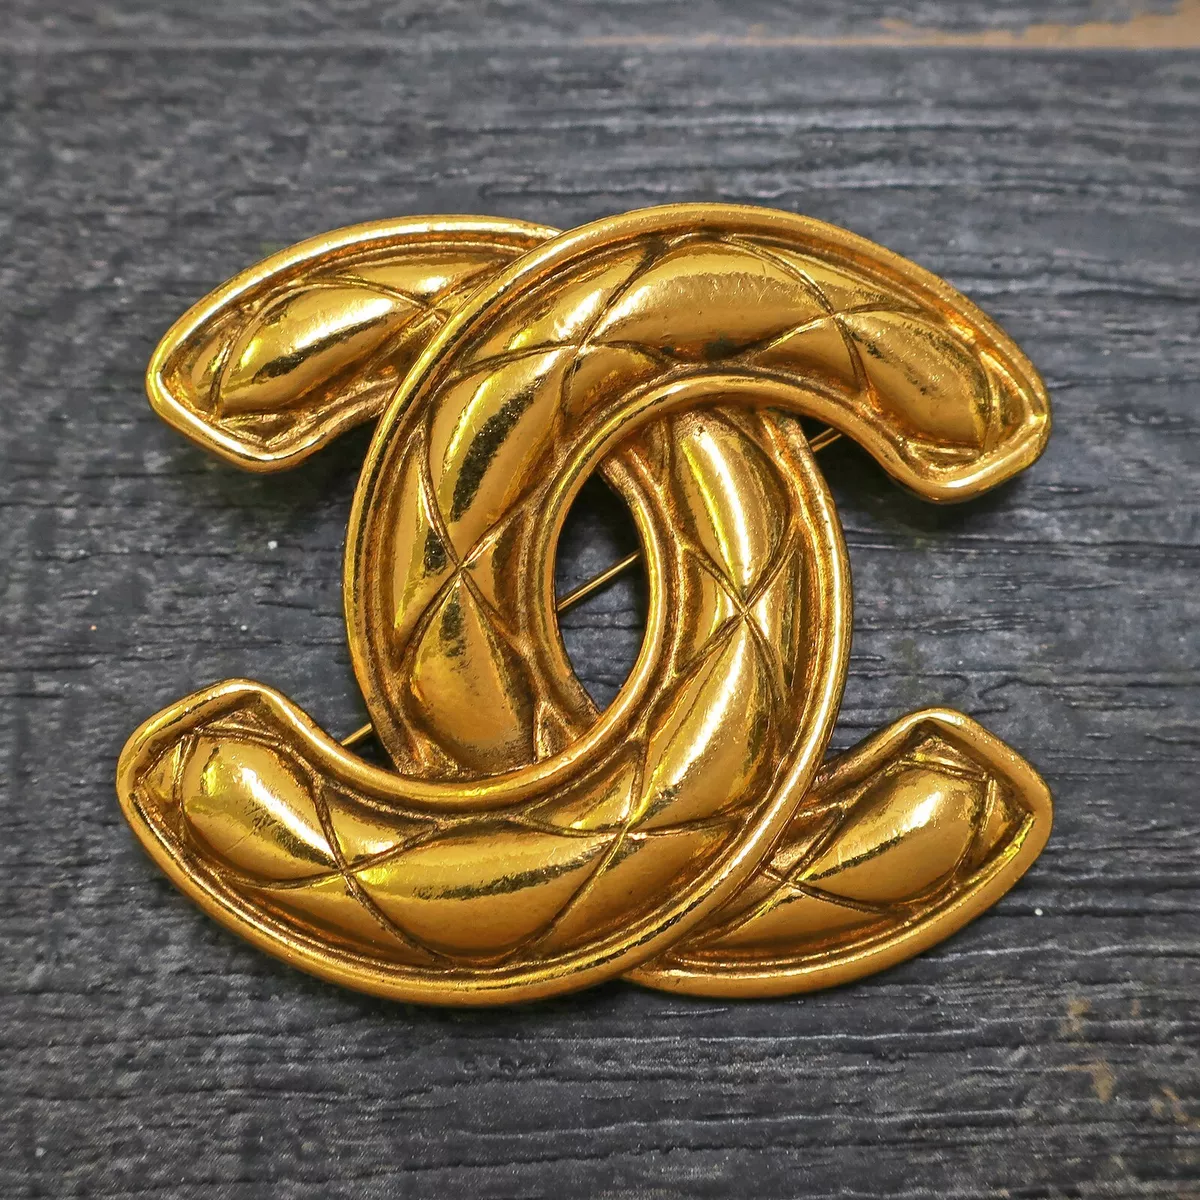 CHANEL Gold Plated CC Logos Matelasse Vintage Pin Brooch #352c Rise-on